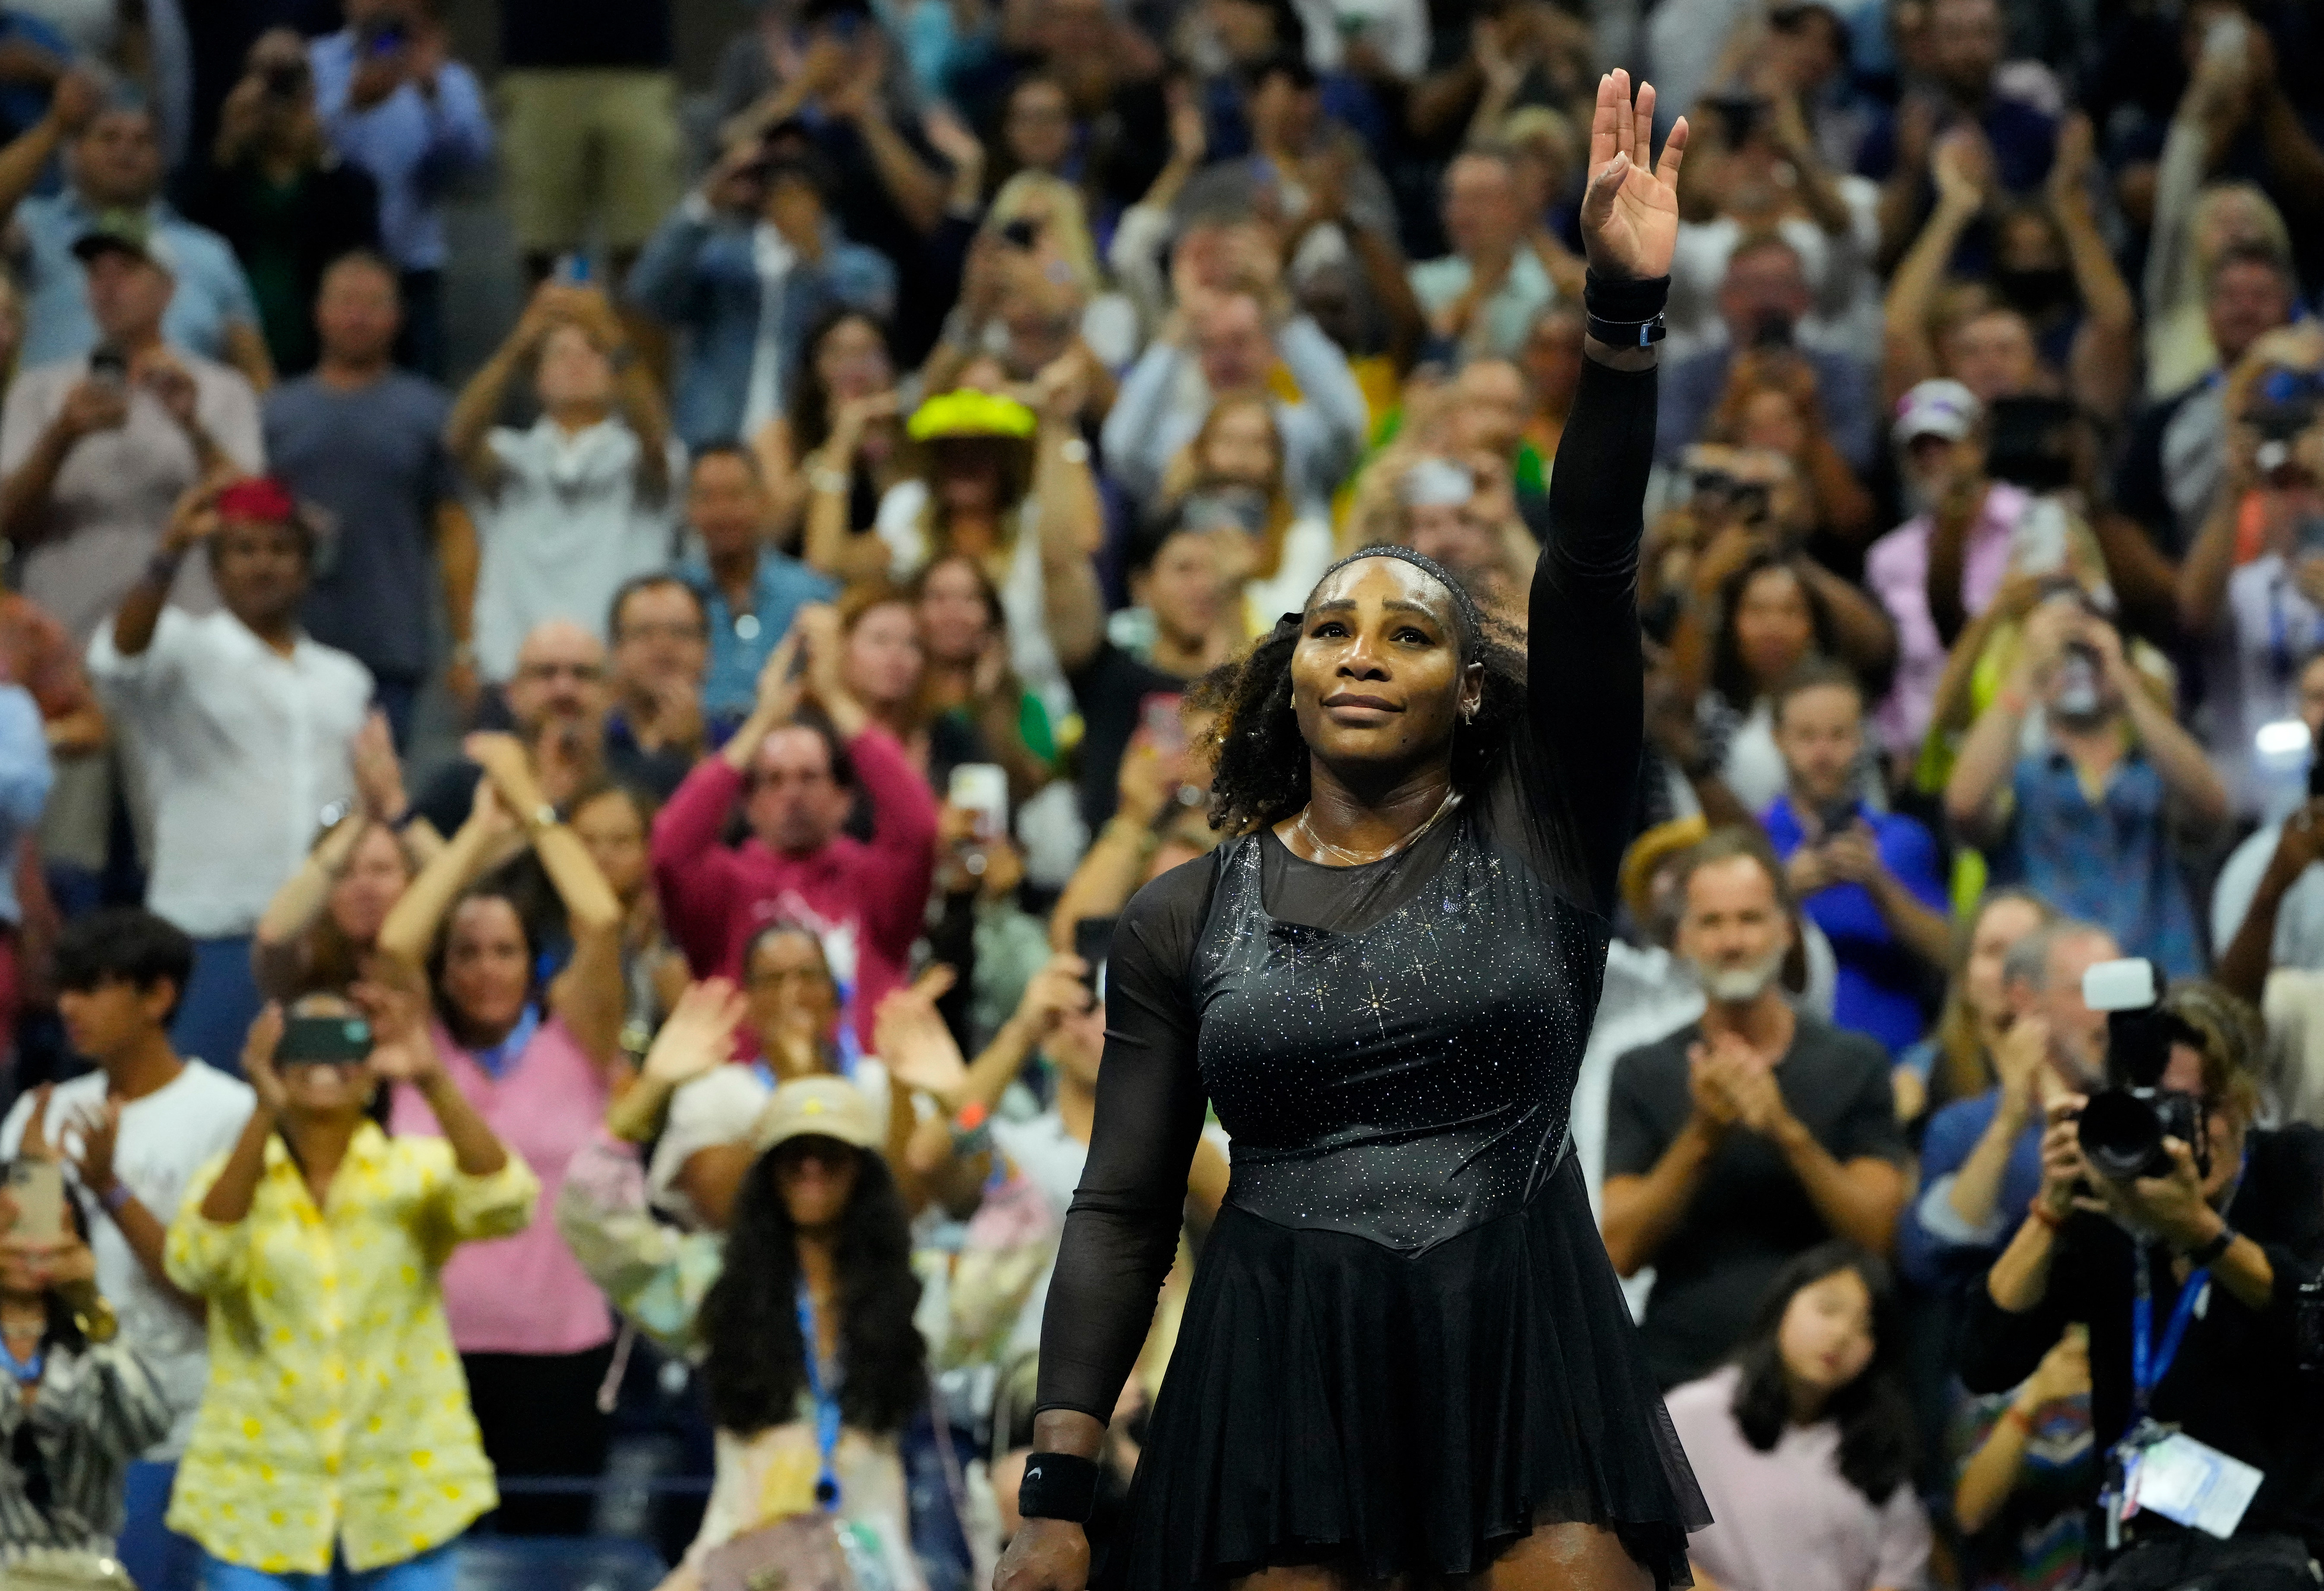 Sept 2, 2022; Flushing, NY, USA; Serena Williams of the USA waves to the crowd after losing to Ajla Tomljanovic of Australia on day five of the 2022 U.S. Open tennis tournament at USTA Billie Jean King National Tennis Center. Mandatory Credit: Robert Deutsch-USA TODAY Sports